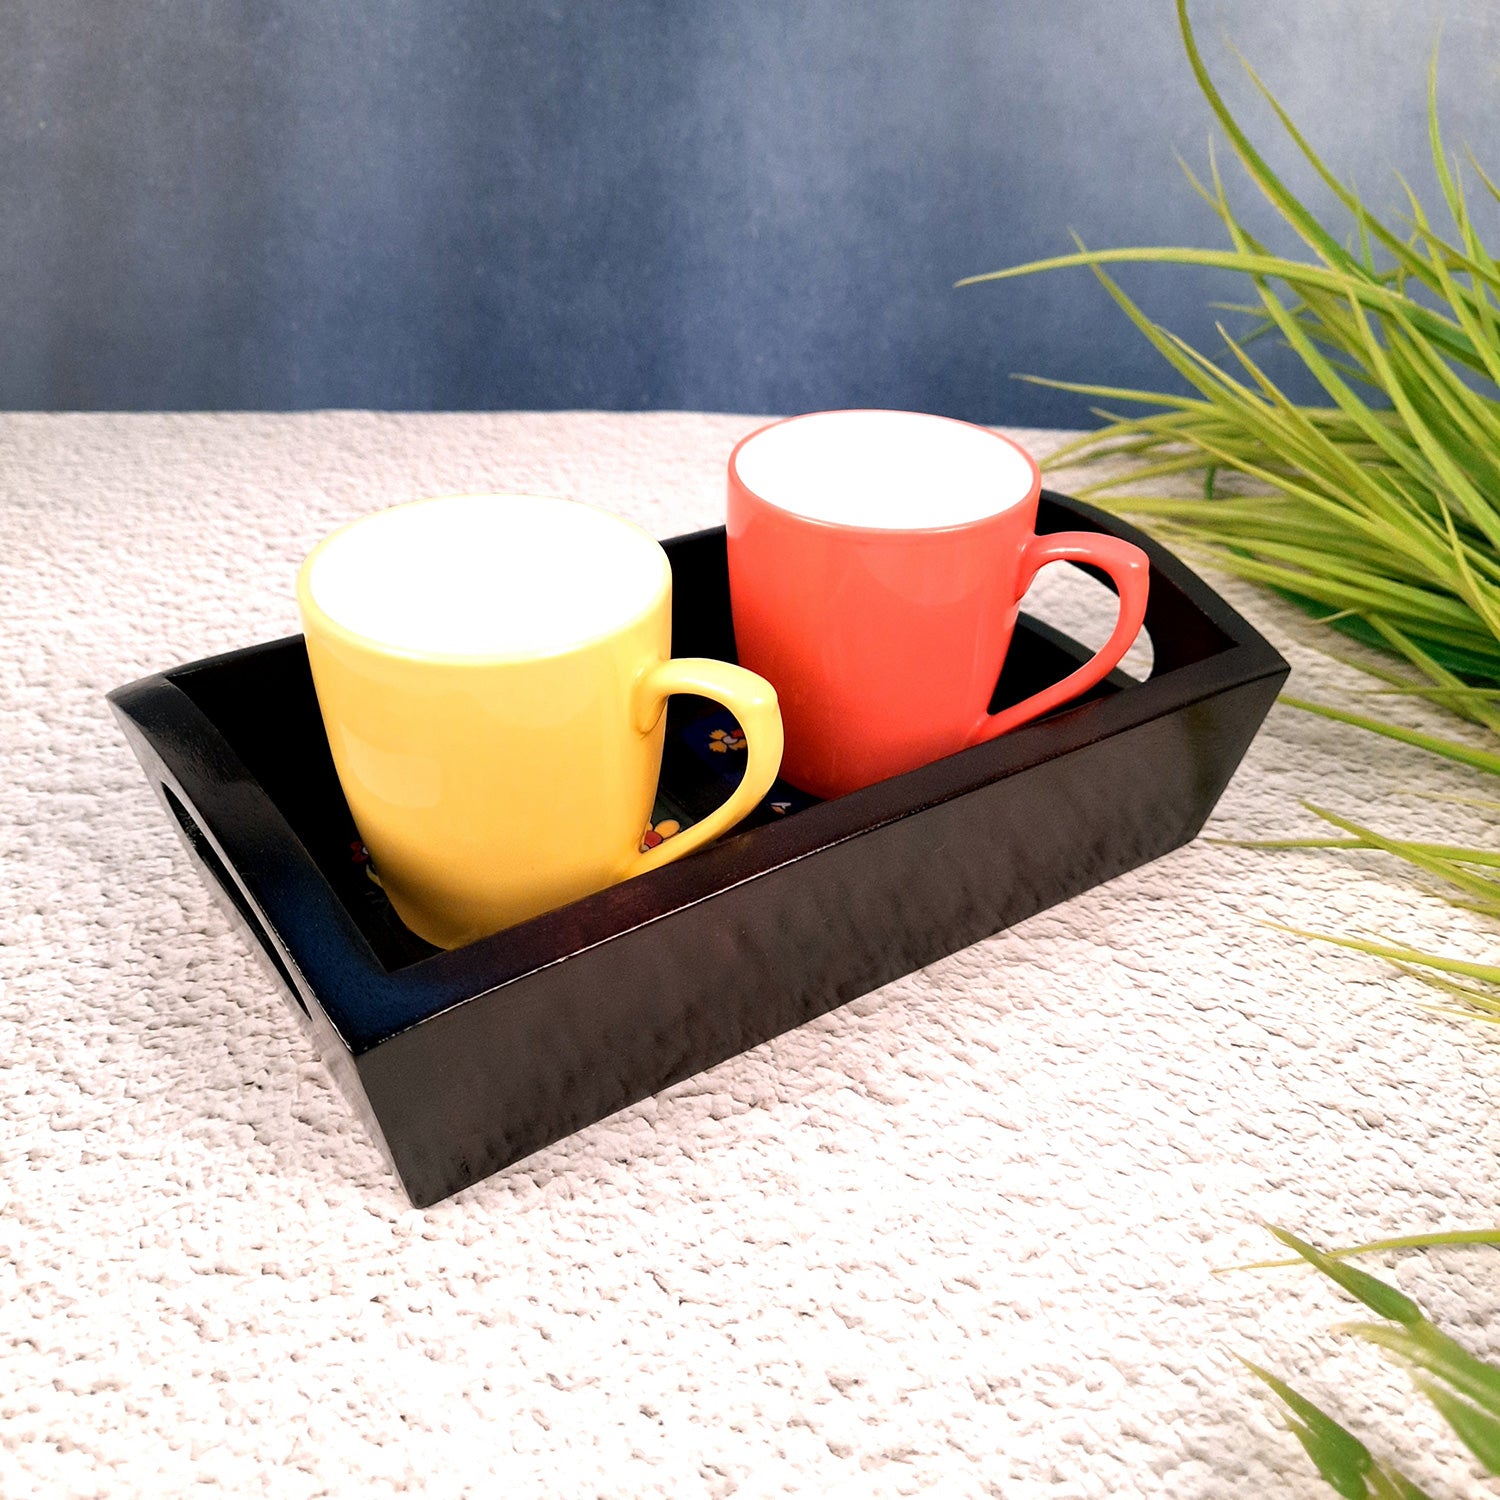 Serving Tray With Ceramic Tiles | Tea & Snacks Serving Platter Wooden - for Home, Dining Table, Kitchen Decor & Gifts - 9 Inch - Apkamart